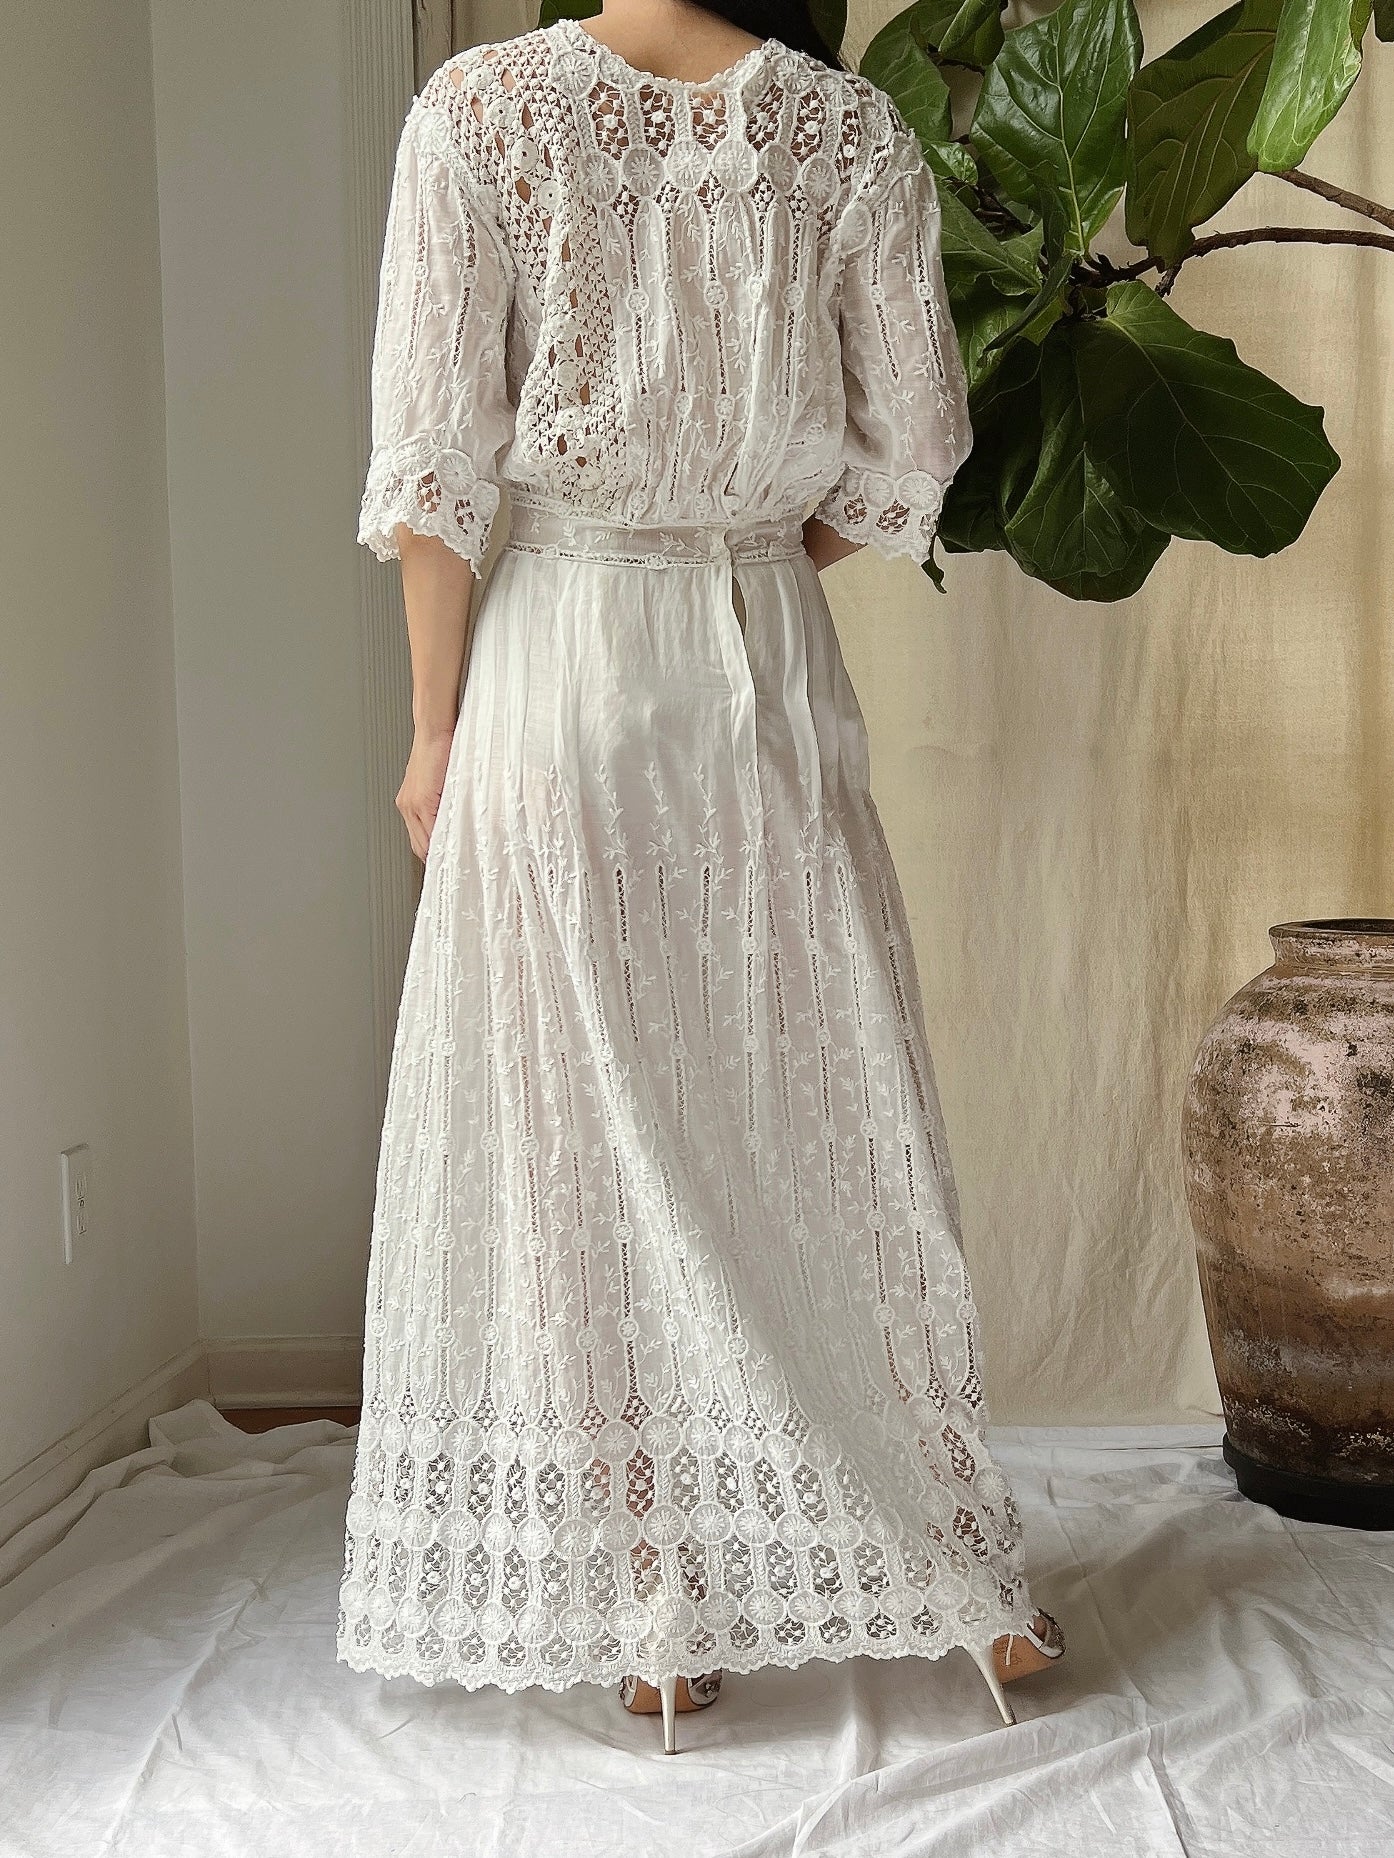 Antique Cotton Embroidered Dress - S